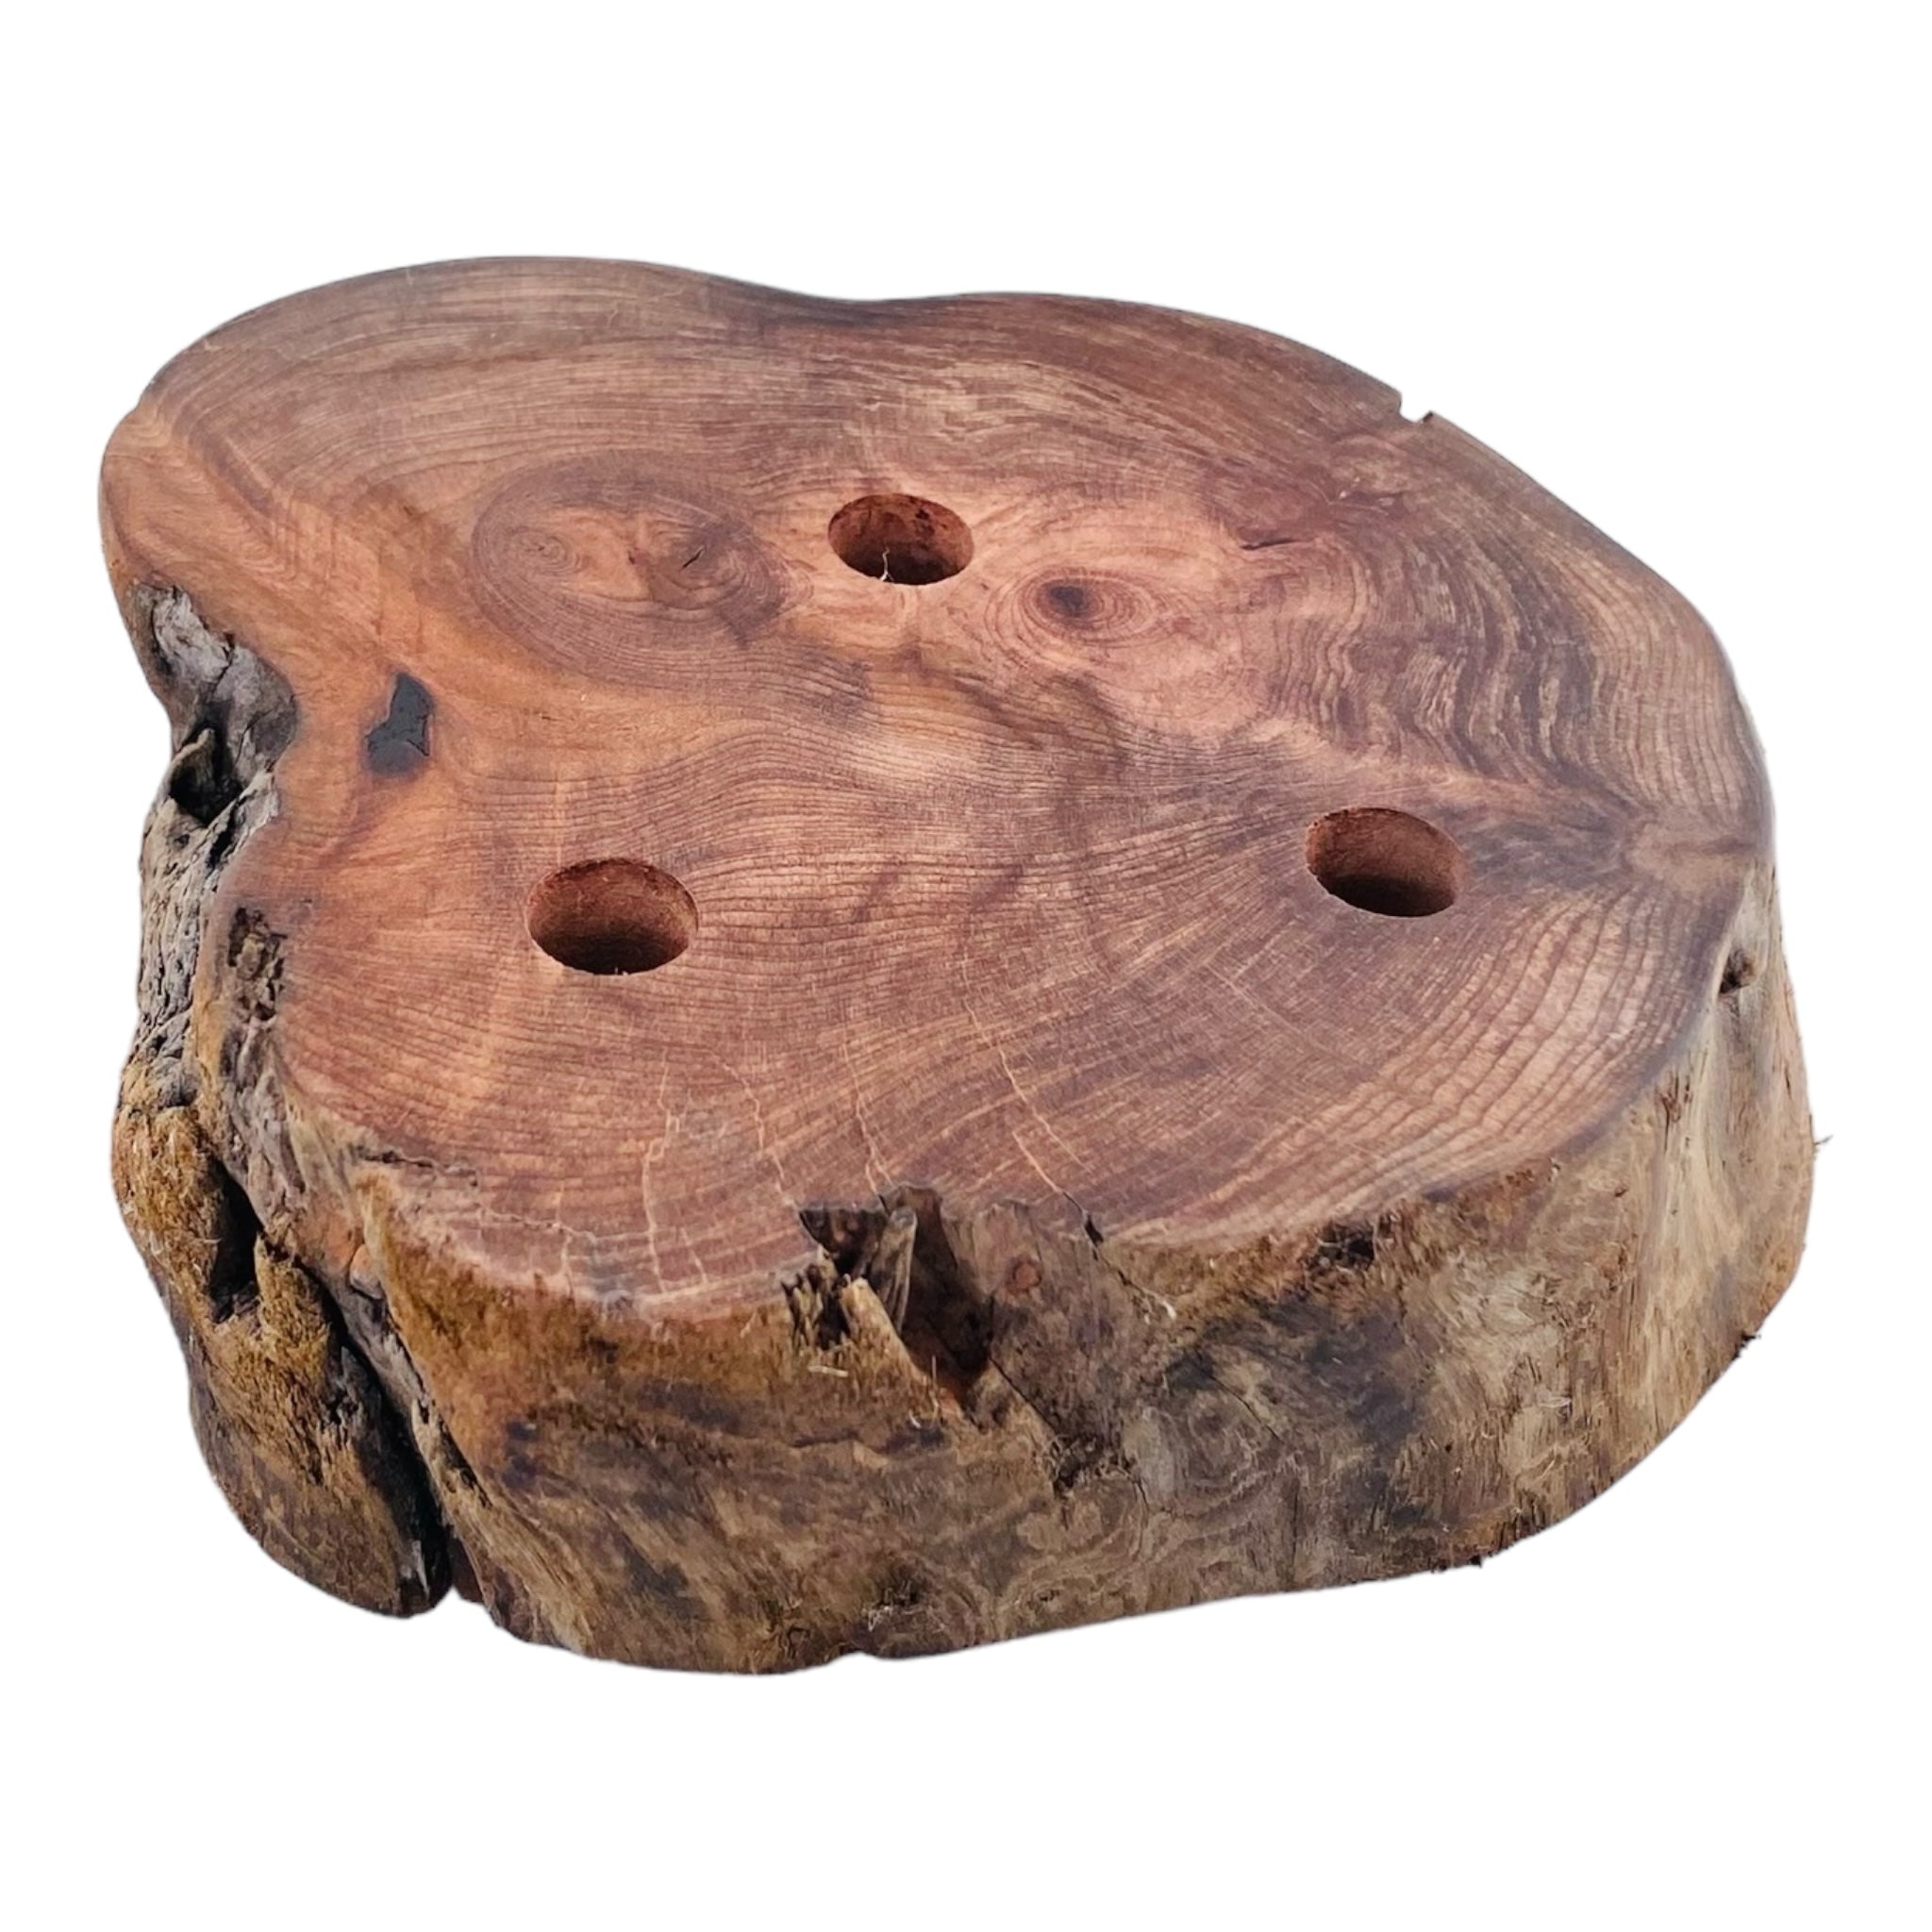 3 Hole Wood Display Stand Holder For 10mm Bong Bowl Pieces Or Quartz Bangers - Red Wood Burl With Live Edge